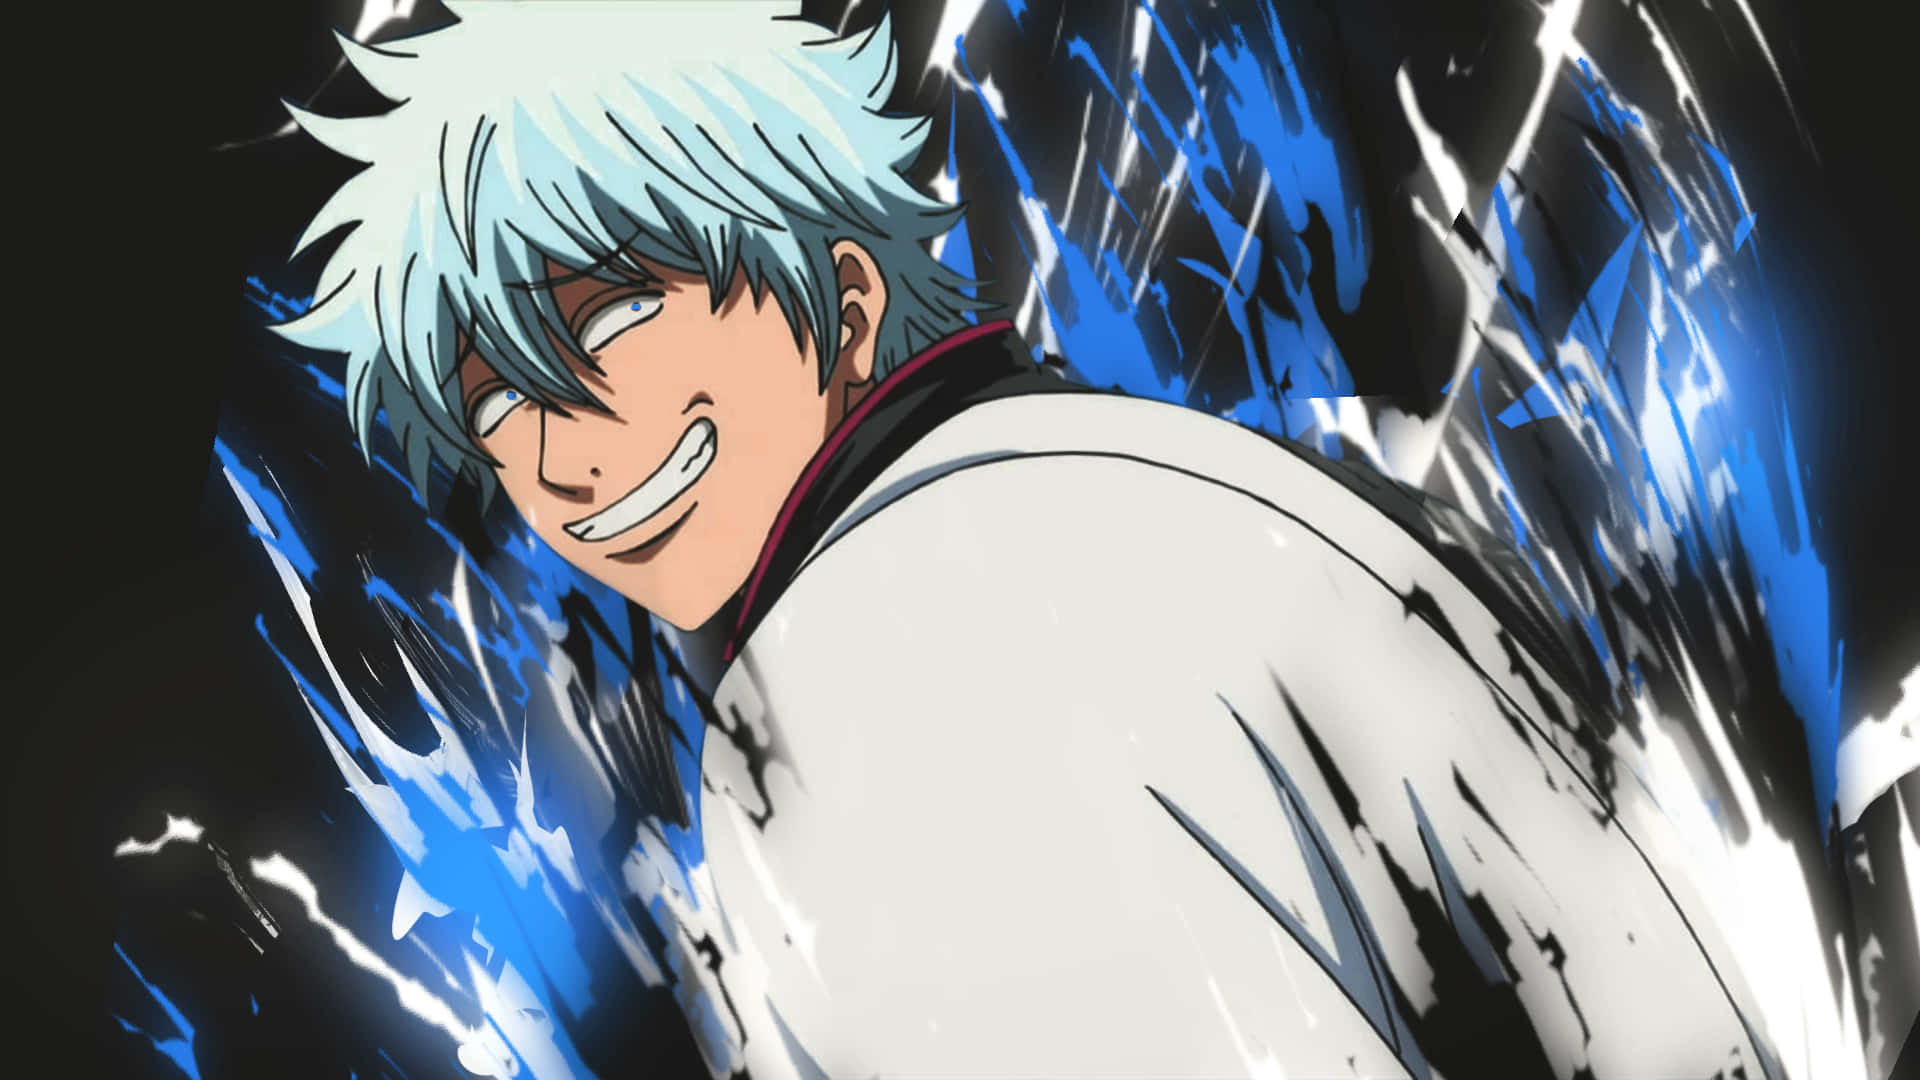 Jump aboard the Gintama adventure for non-stop comedy, action, and surprises around every corner!